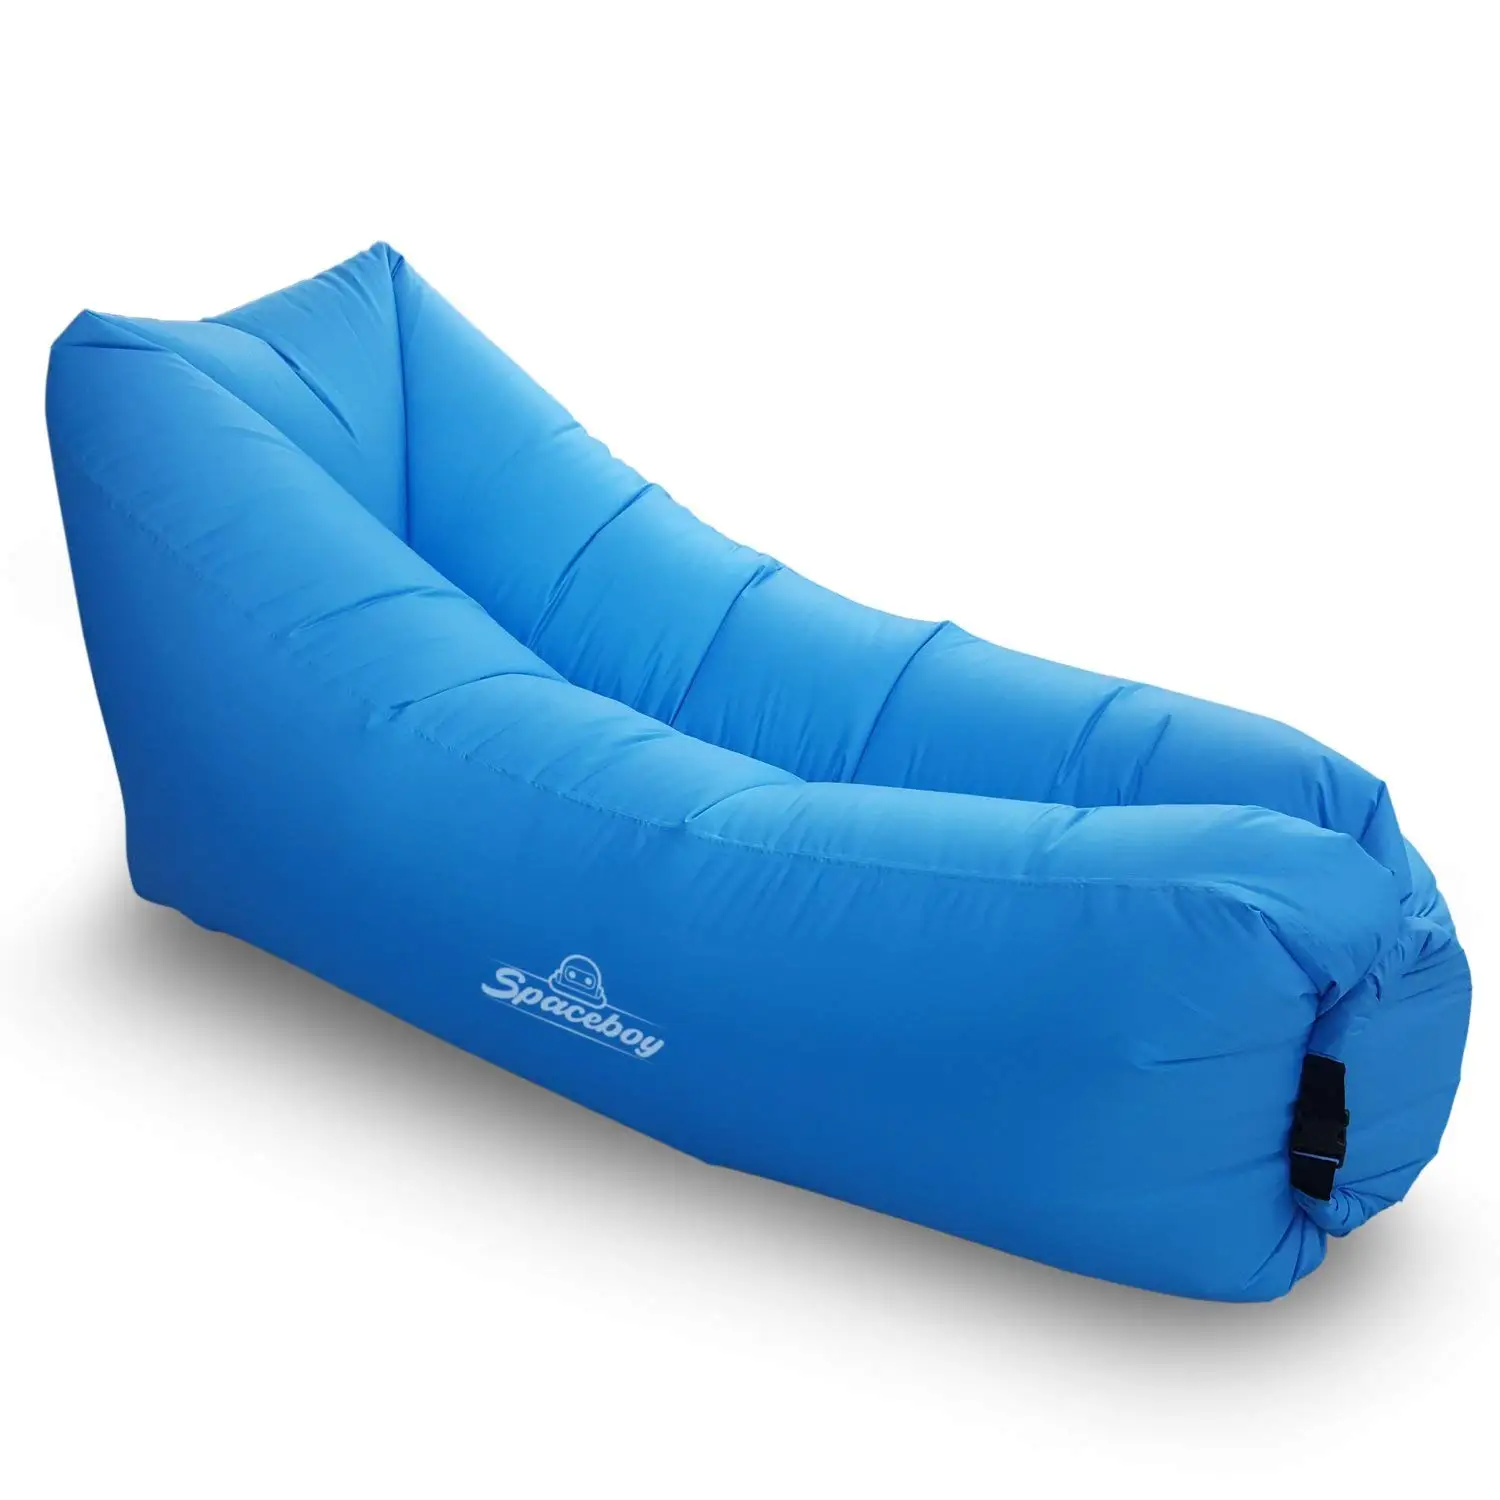 Cheap Inflatable Lounge Chair, find Inflatable Lounge Chair deals on